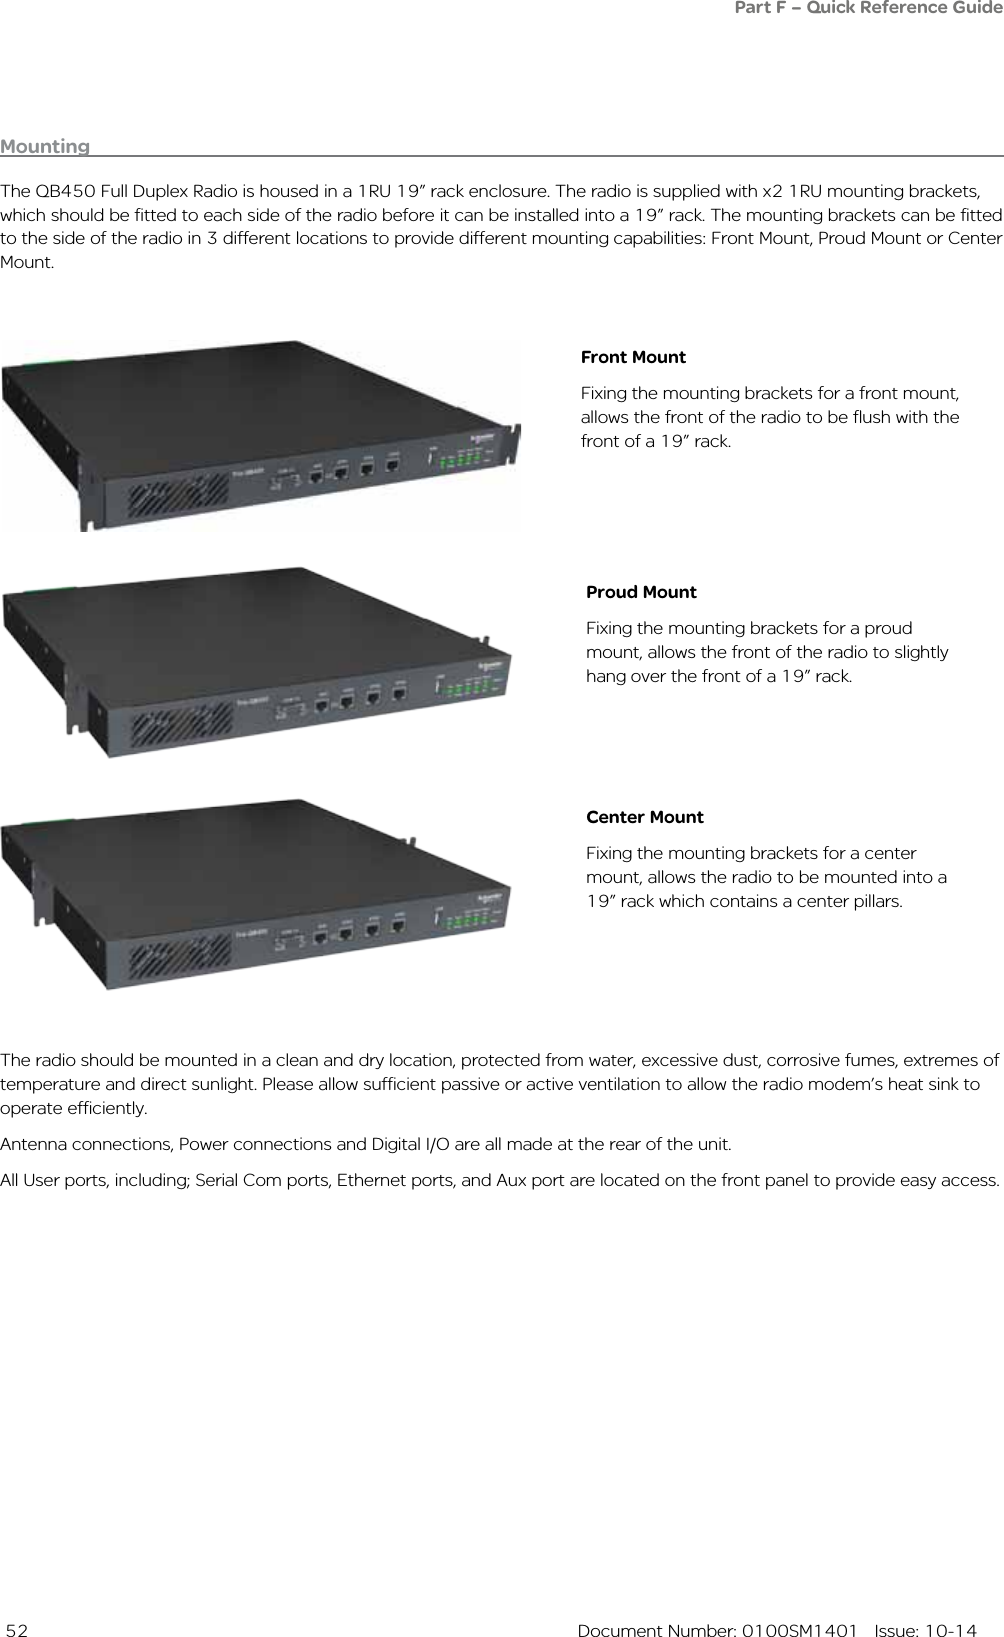  52  Document Number: 0100SM1401   Issue: 10-14Part F – Quick Reference GuideMountingThe QB450 Full Duplex Radio is housed in a 1RU 19” rack enclosure. The radio is supplied with x2 1RU mounting brackets, which should be fitted to each side of the radio before it can be installed into a 19” rack. The mounting brackets can be fitted to the side of the radio in 3 different locations to provide different mounting capabilities: Front Mount, Proud Mount or Center Mount.The radio should be mounted in a clean and dry location, protected from water, excessive dust, corrosive fumes, extremes of temperature and direct sunlight. Please allow sufficient passive or active ventilation to allow the radio modem’s heat sink to operate efficiently.Antenna connections, Power connections and Digital I/O are all made at the rear of the unit. All User ports, including; Serial Com ports, Ethernet ports, and Aux port are located on the front panel to provide easy access.Front MountFixing the mounting brackets for a front mount, allows the front of the radio to be flush with the front of a 19” rack.Proud MountFixing the mounting brackets for a proud mount, allows the front of the radio to slightly hang over the front of a 19” rack.Center MountFixing the mounting brackets for a center mount, allows the radio to be mounted into a 19” rack which contains a center pillars.